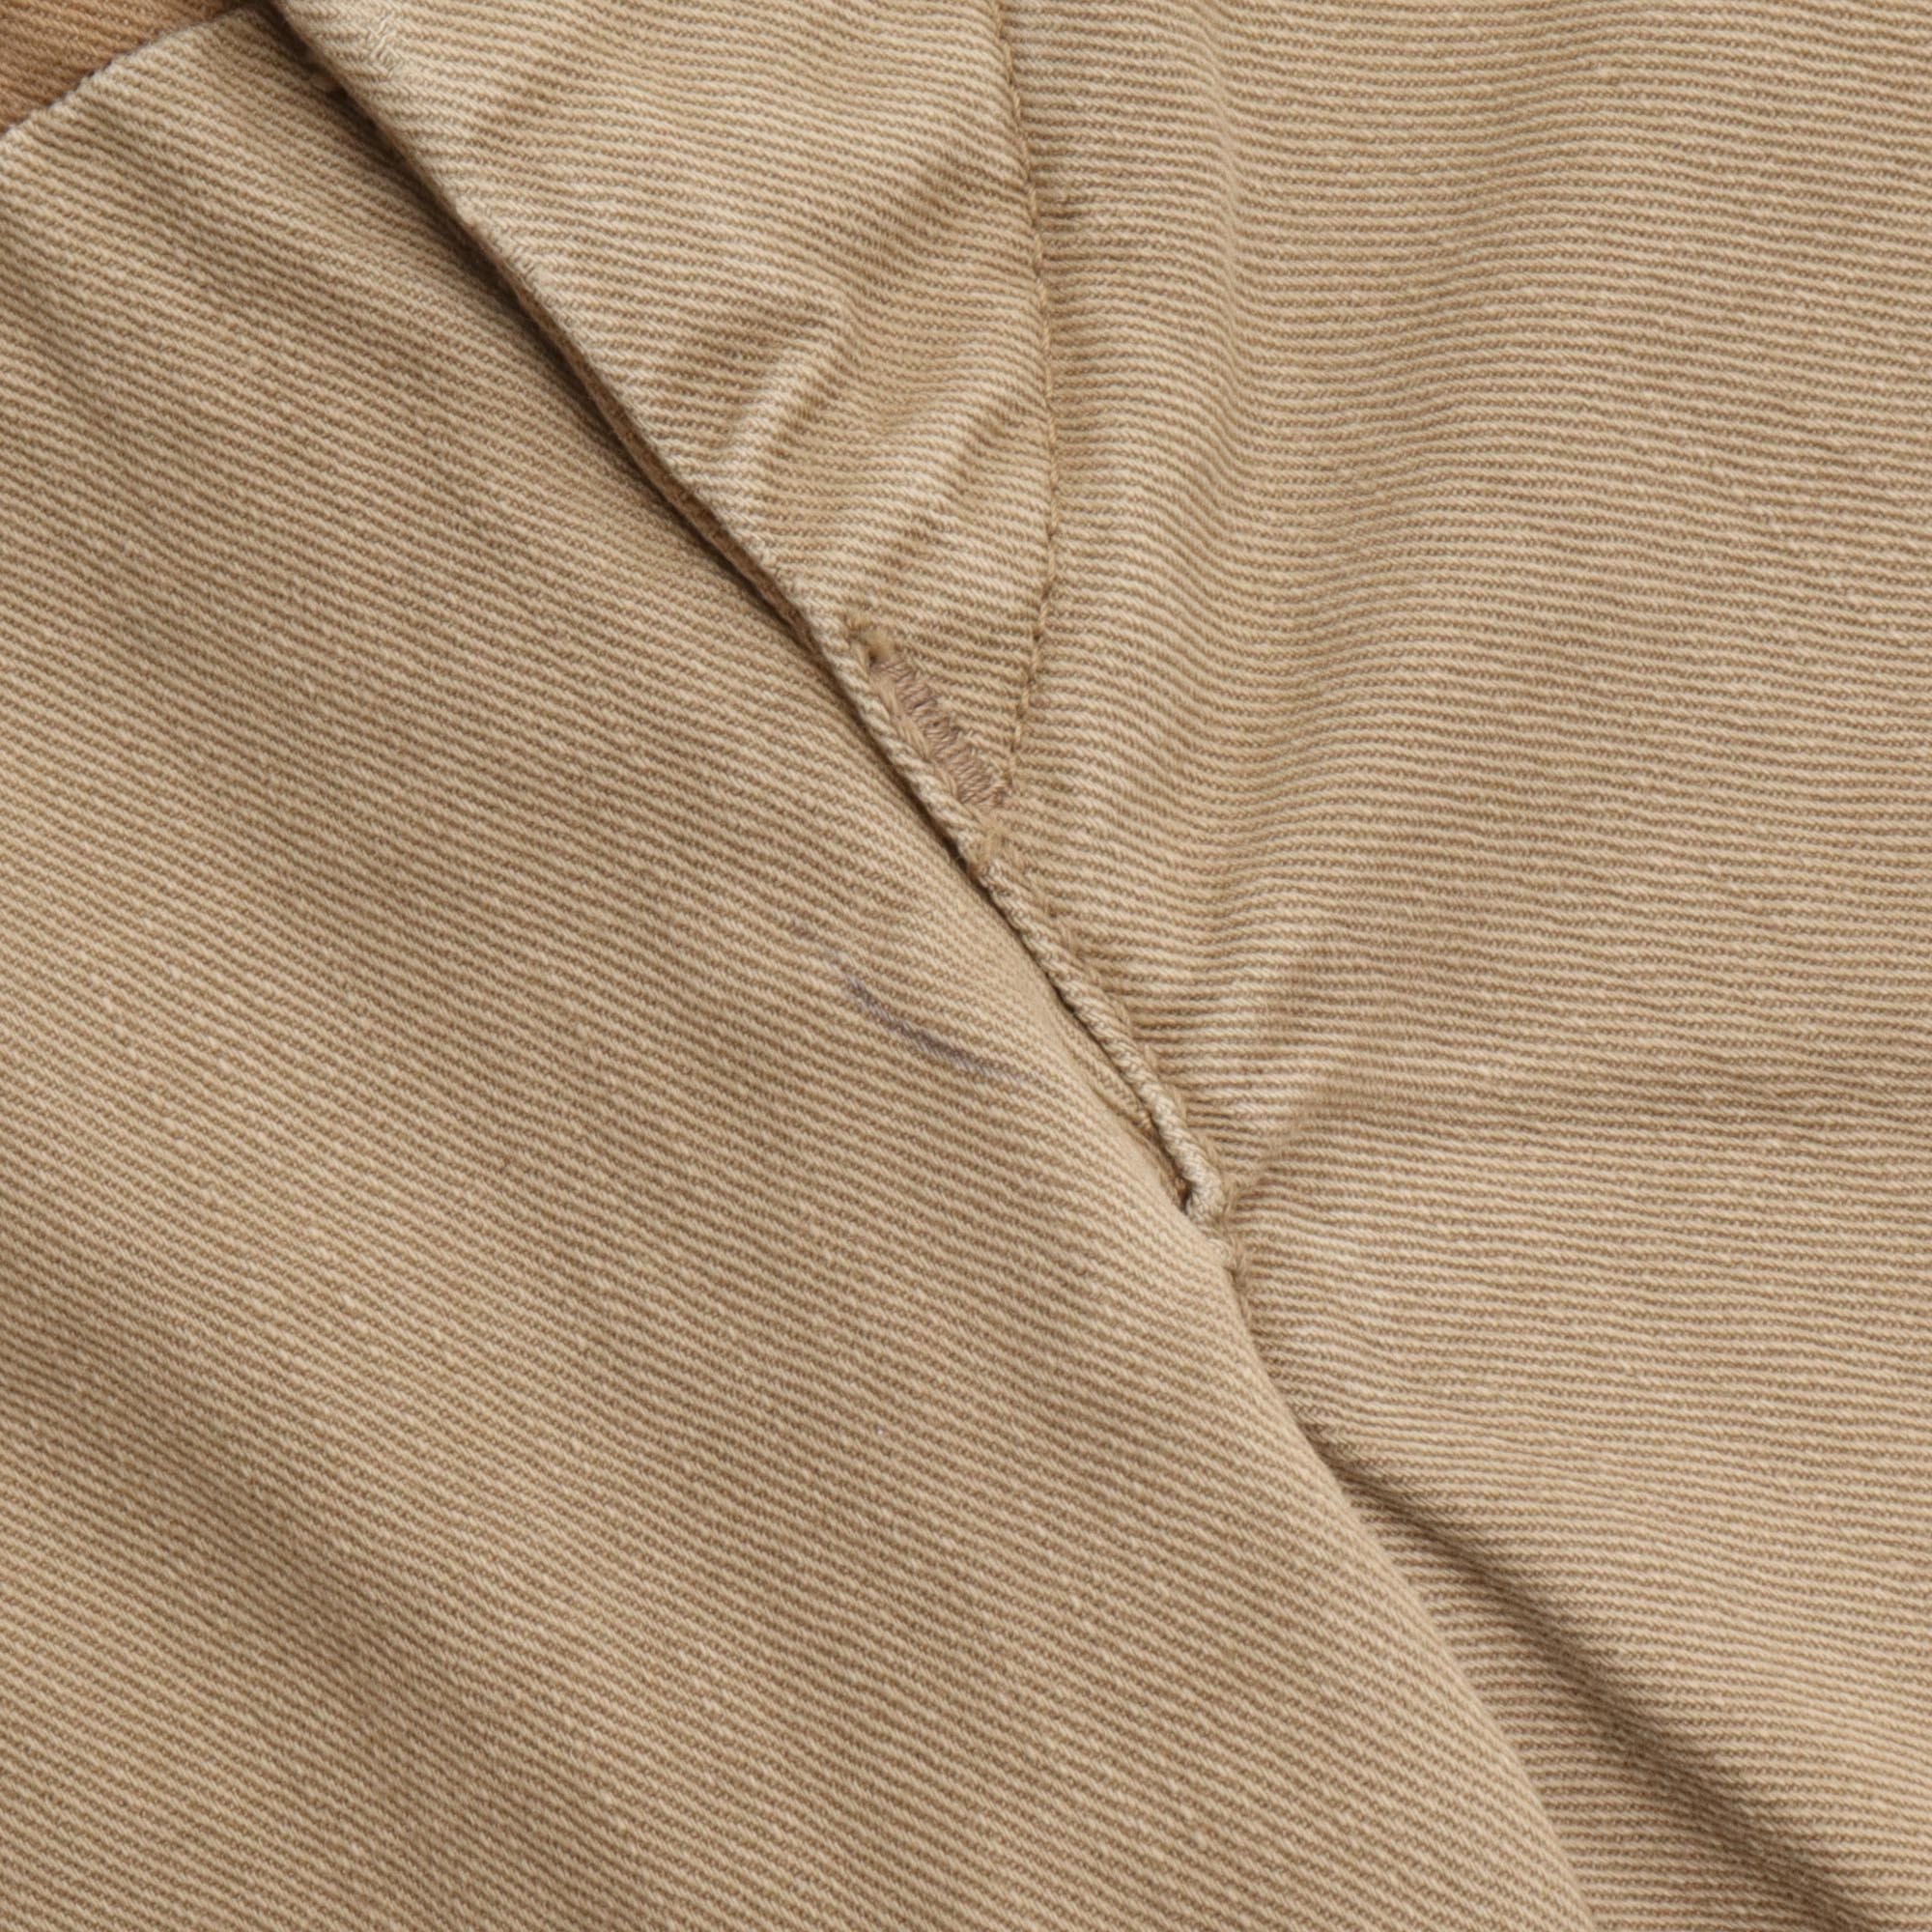 Two-Tone Work Pant